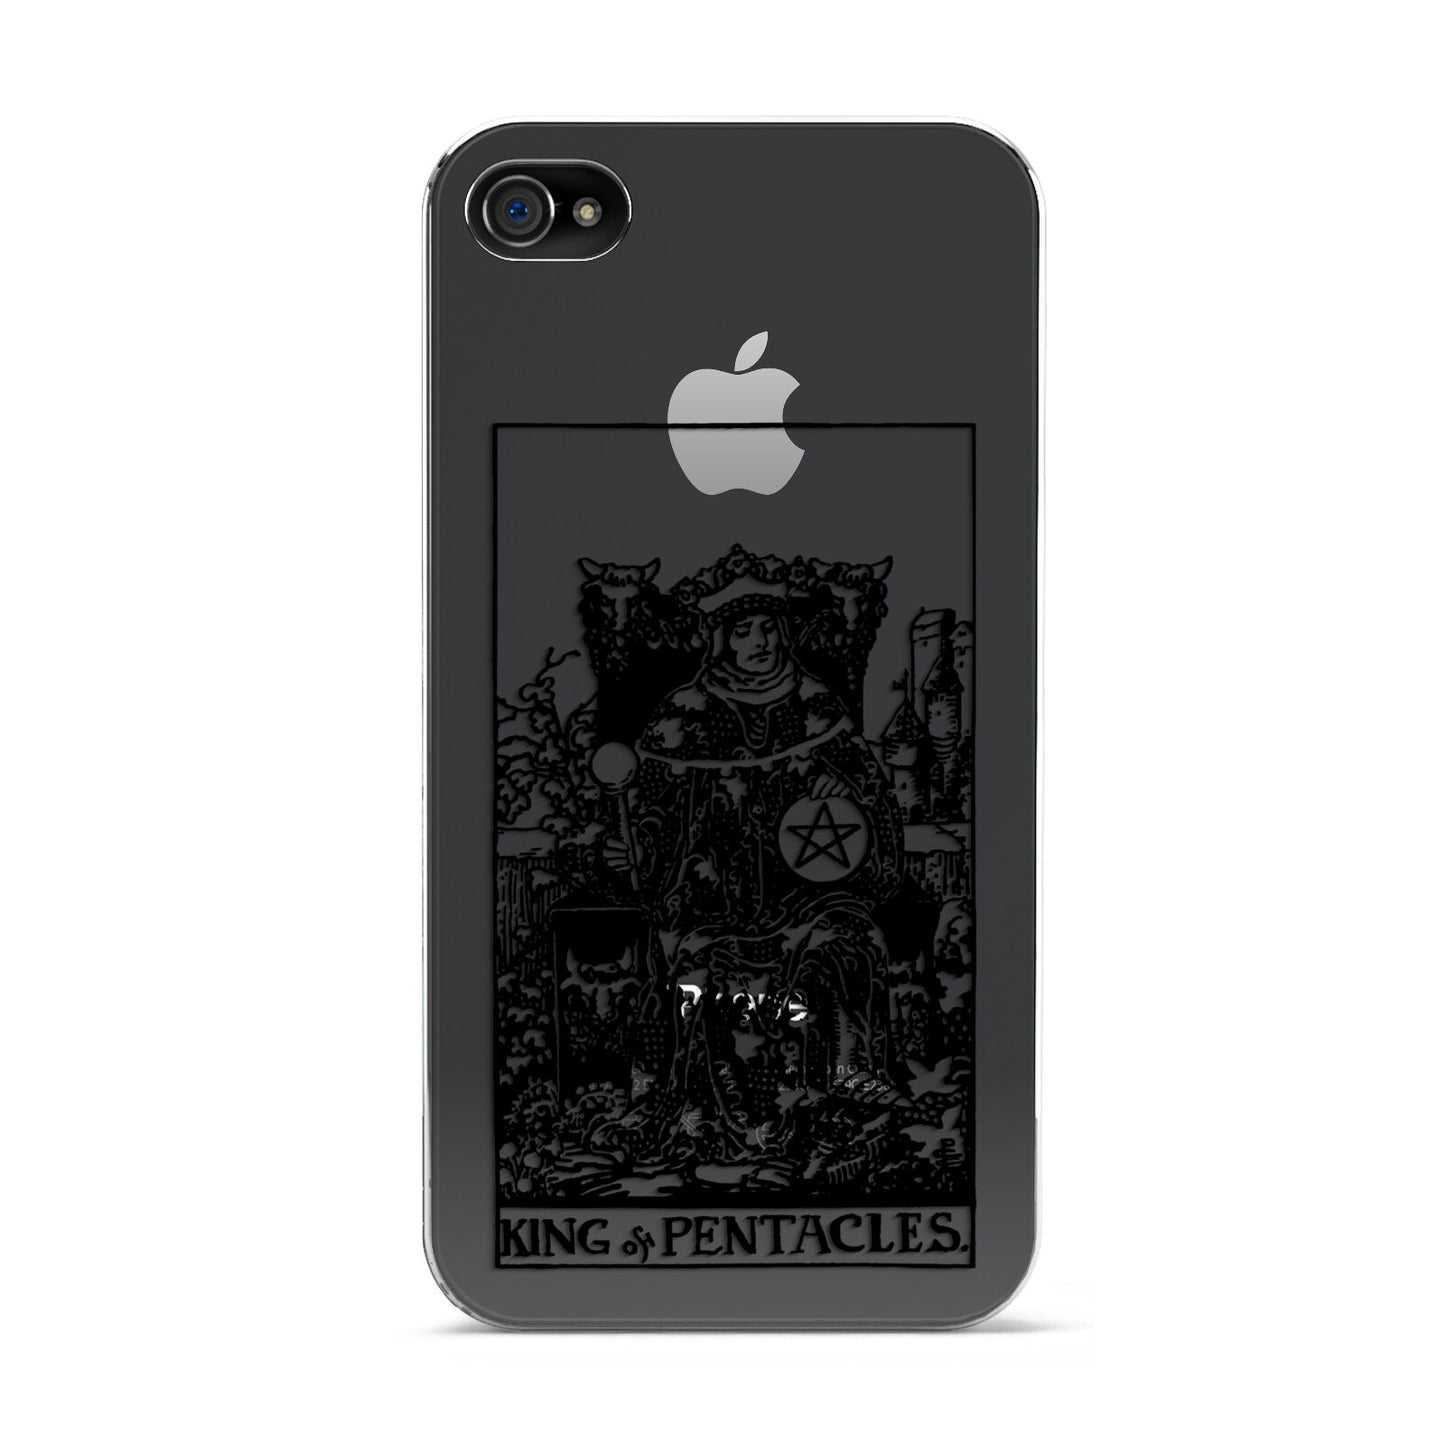 King of Pentacles Monochrome Apple iPhone 4s Case